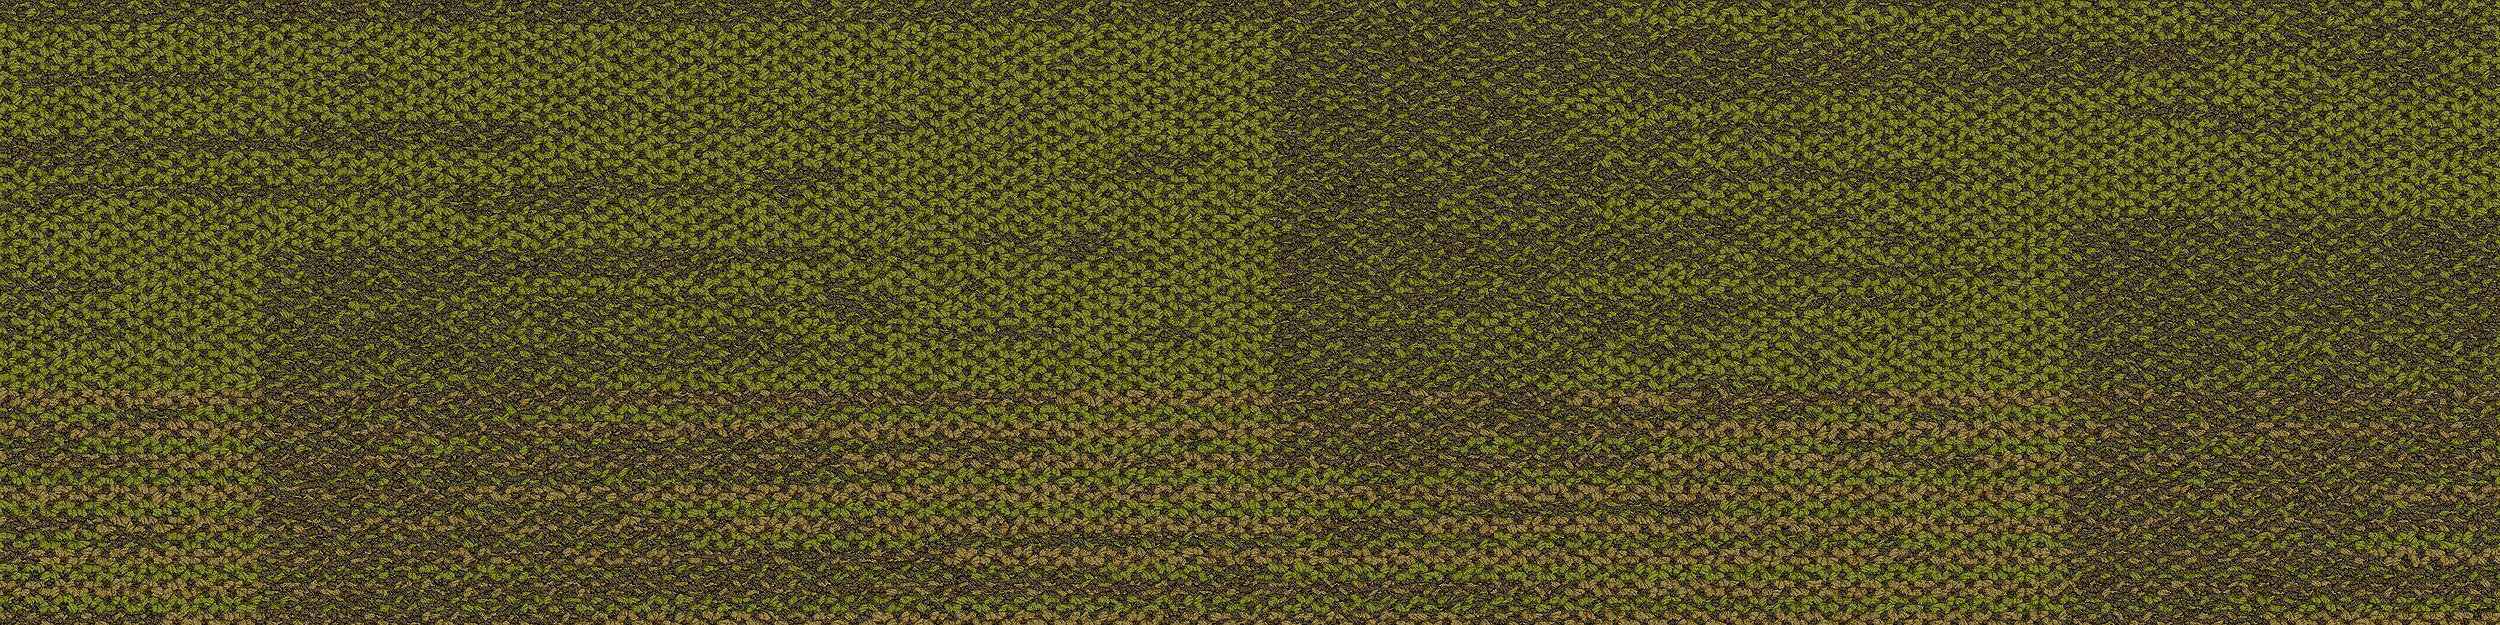 AE317 Carpet Tile In Citron image number 13